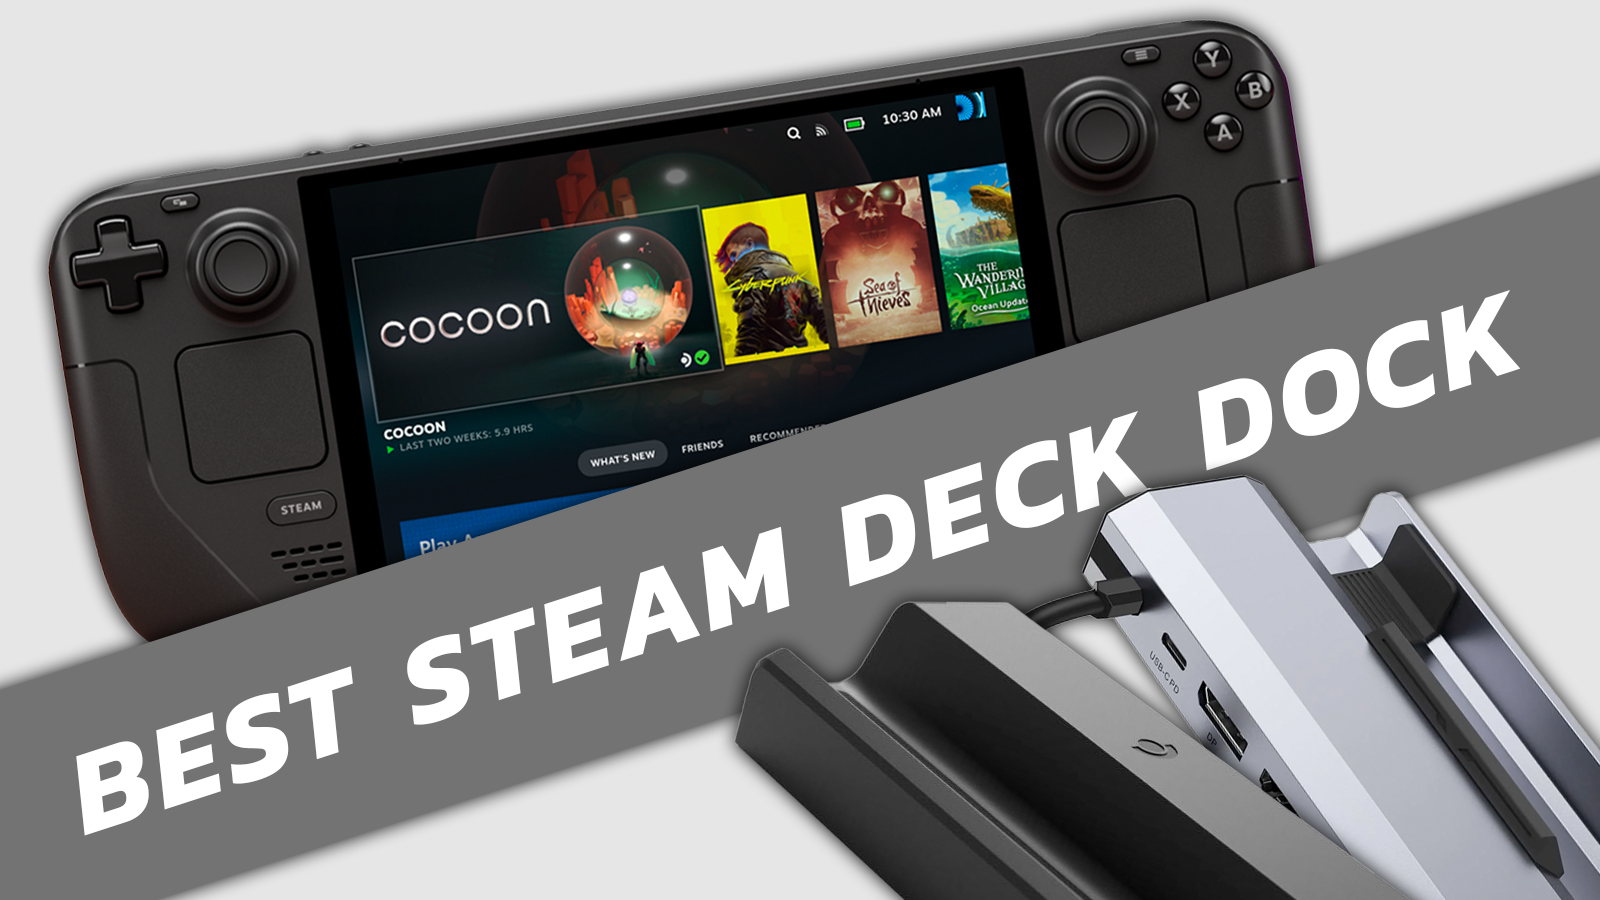 A much cheaper version of Valve's Steam Deck dock just hit the market